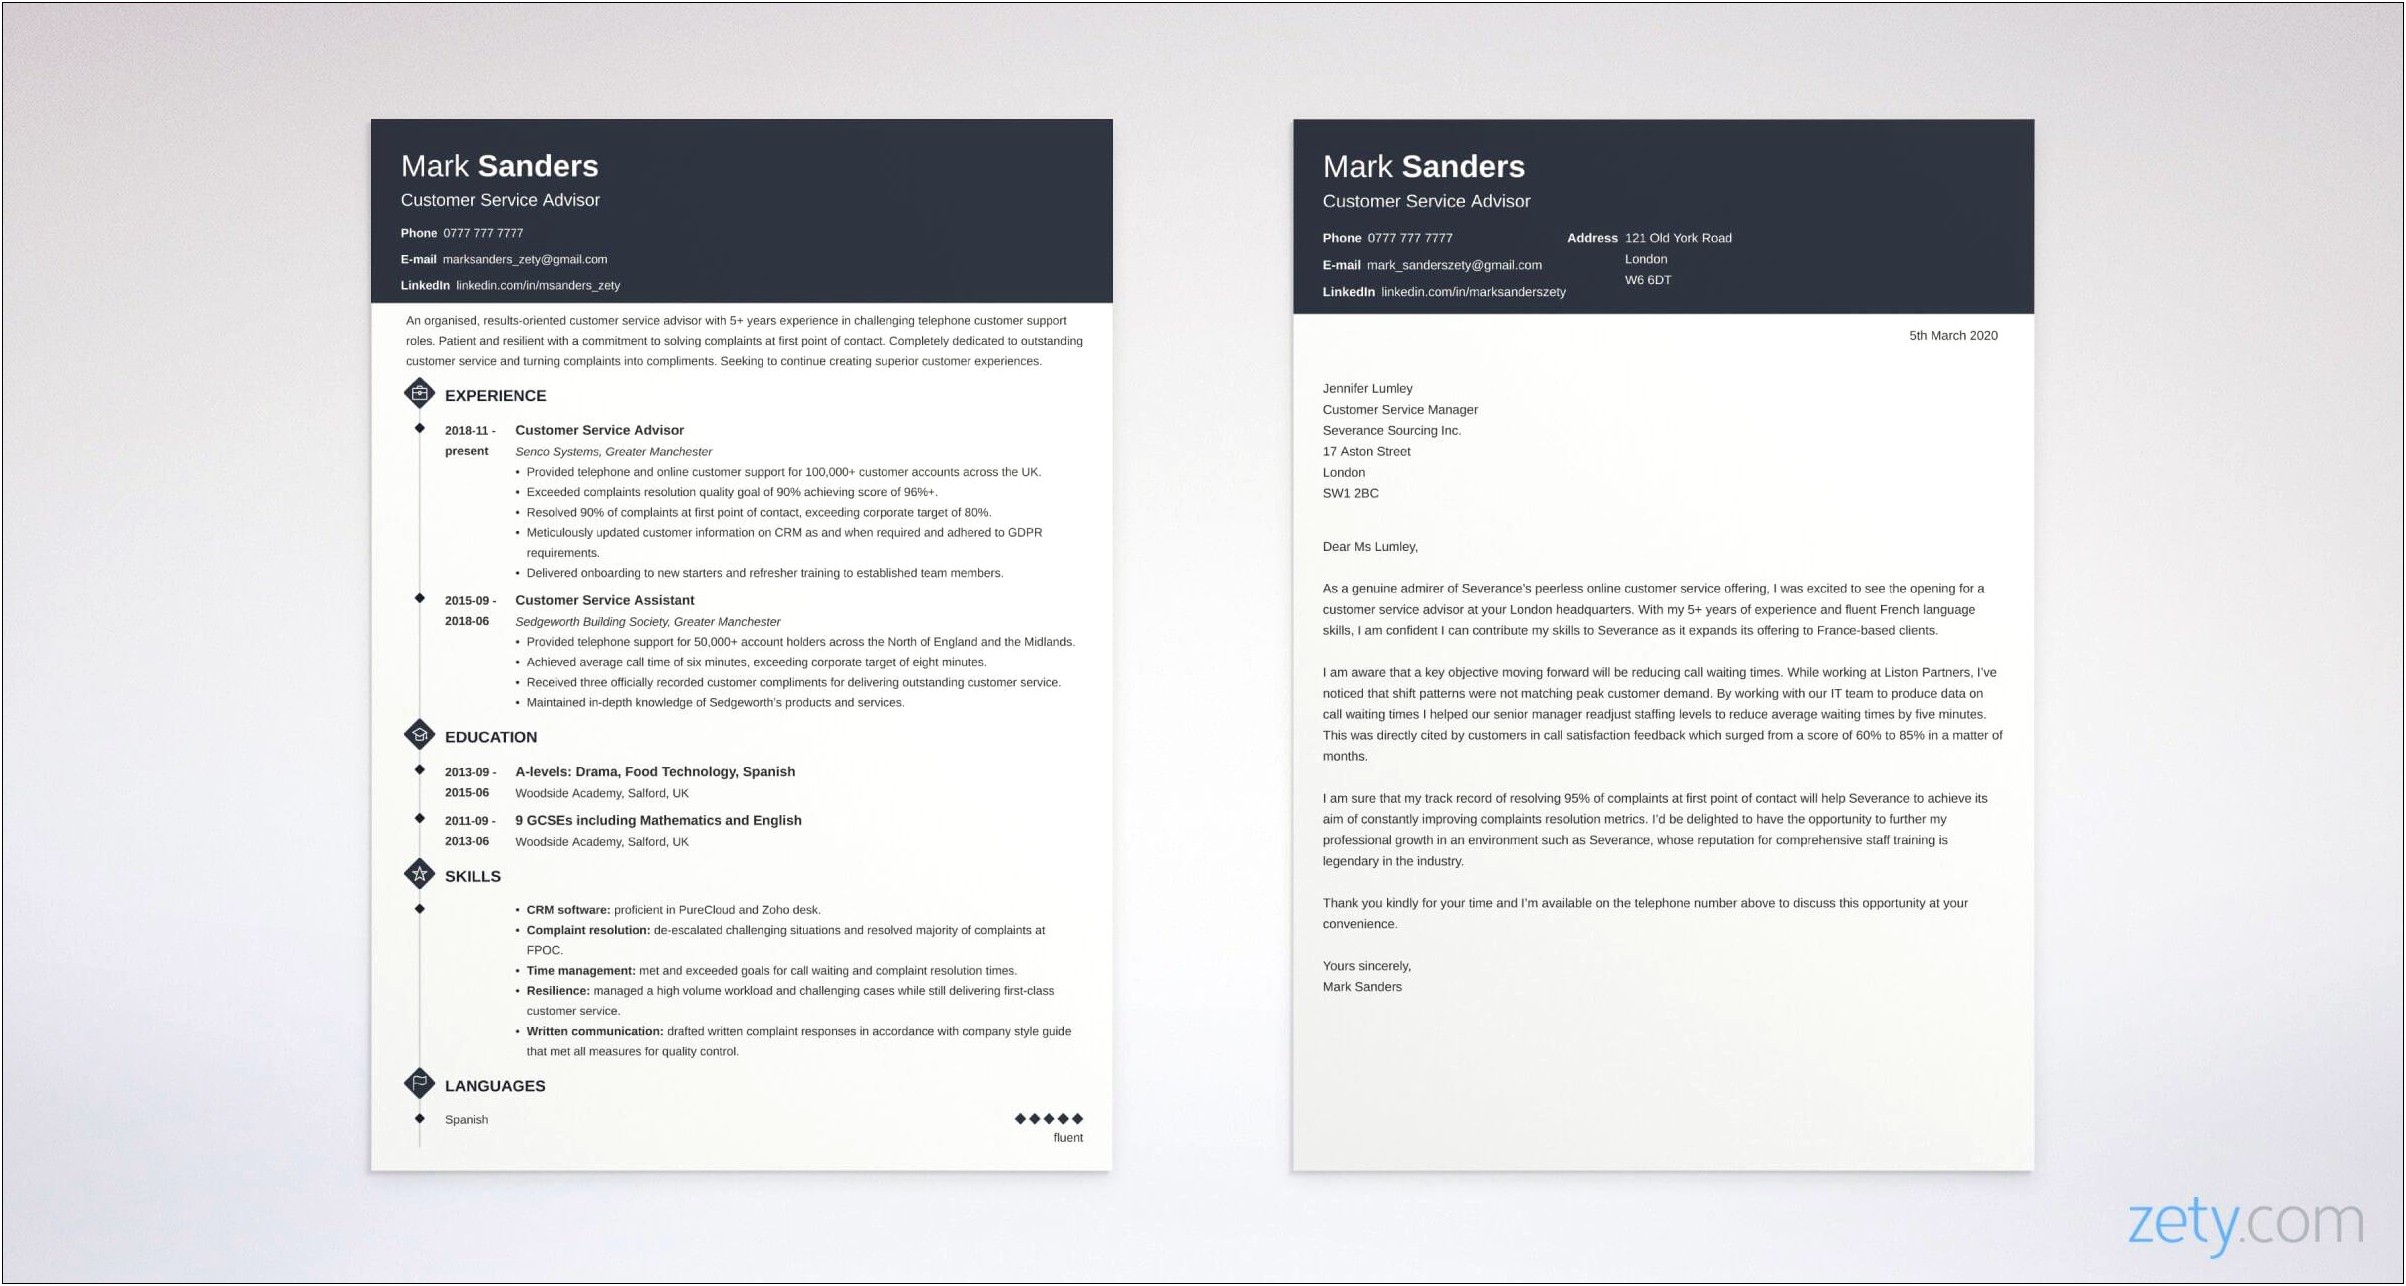 Should The Cover Letter Format Match The Resume